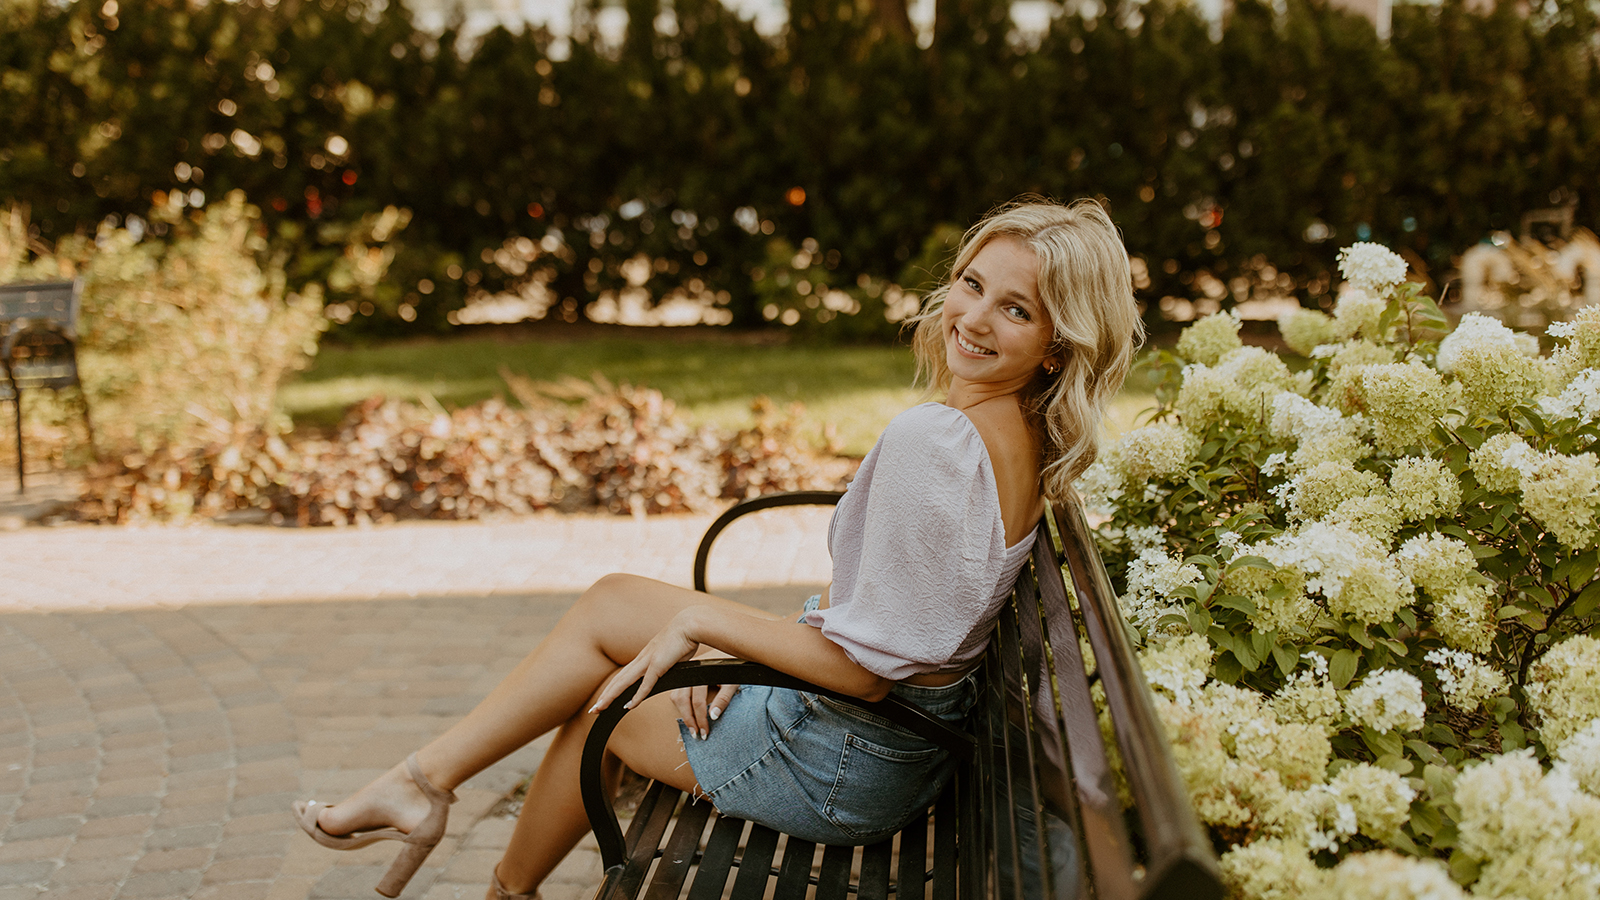 Hayley Corbridge sits on a bench with flowers blooming behind her